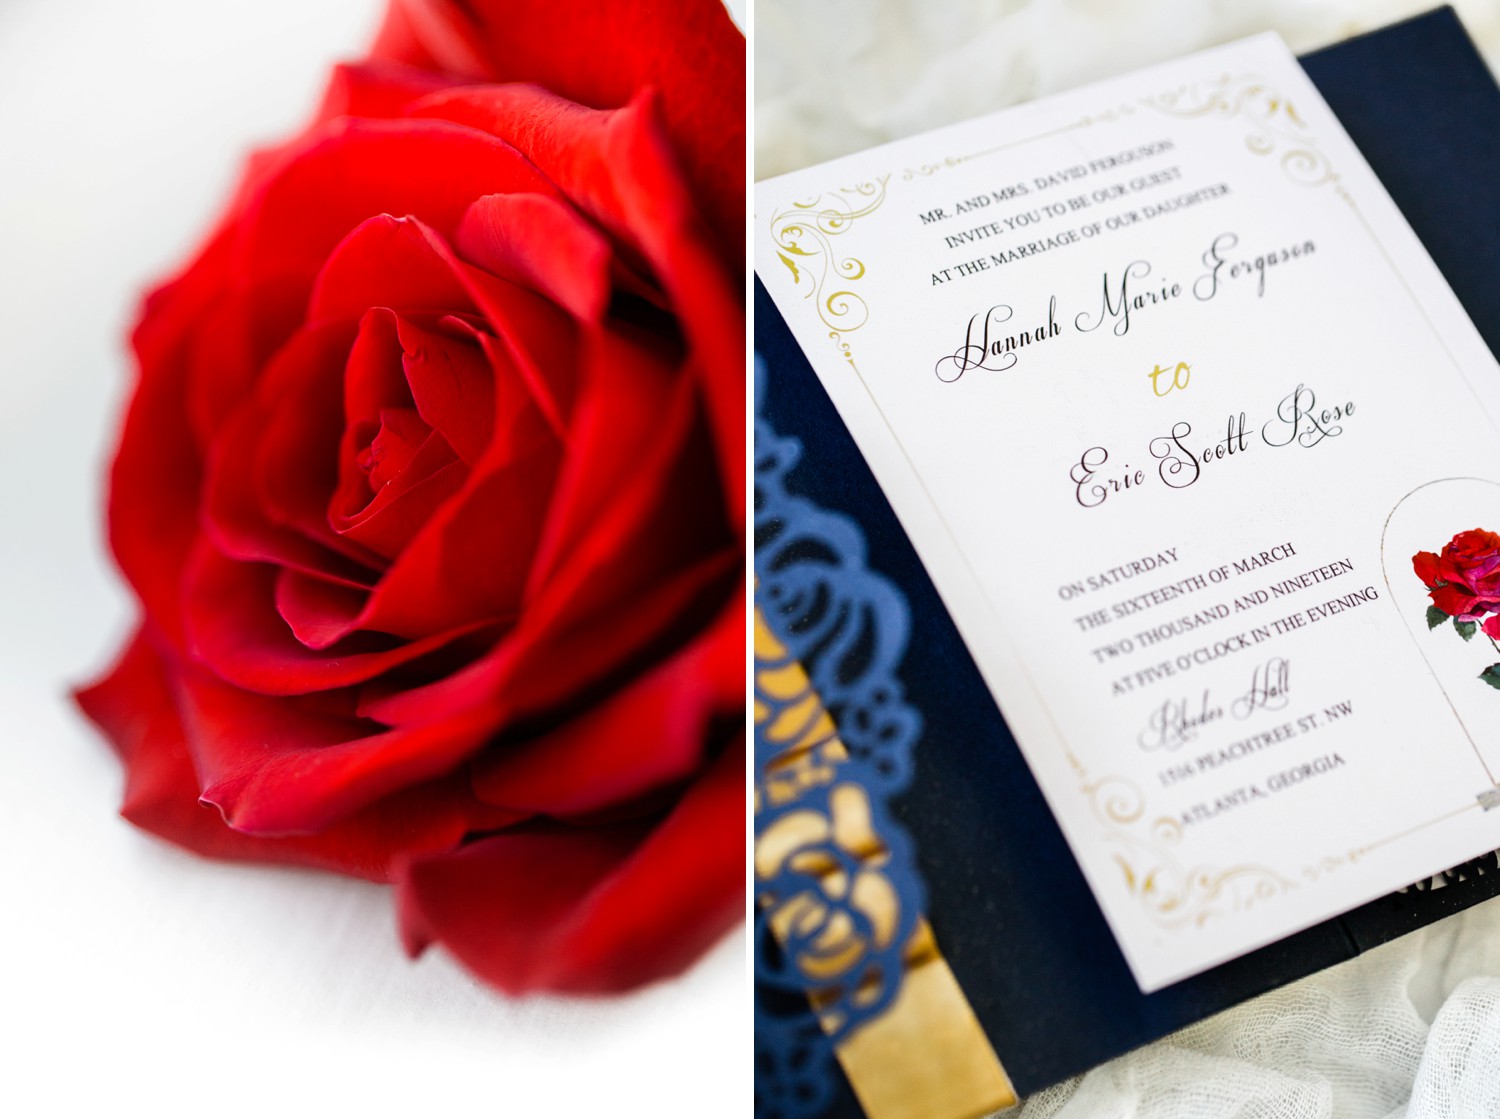 Beauty and the Beast inspired wedding invitations